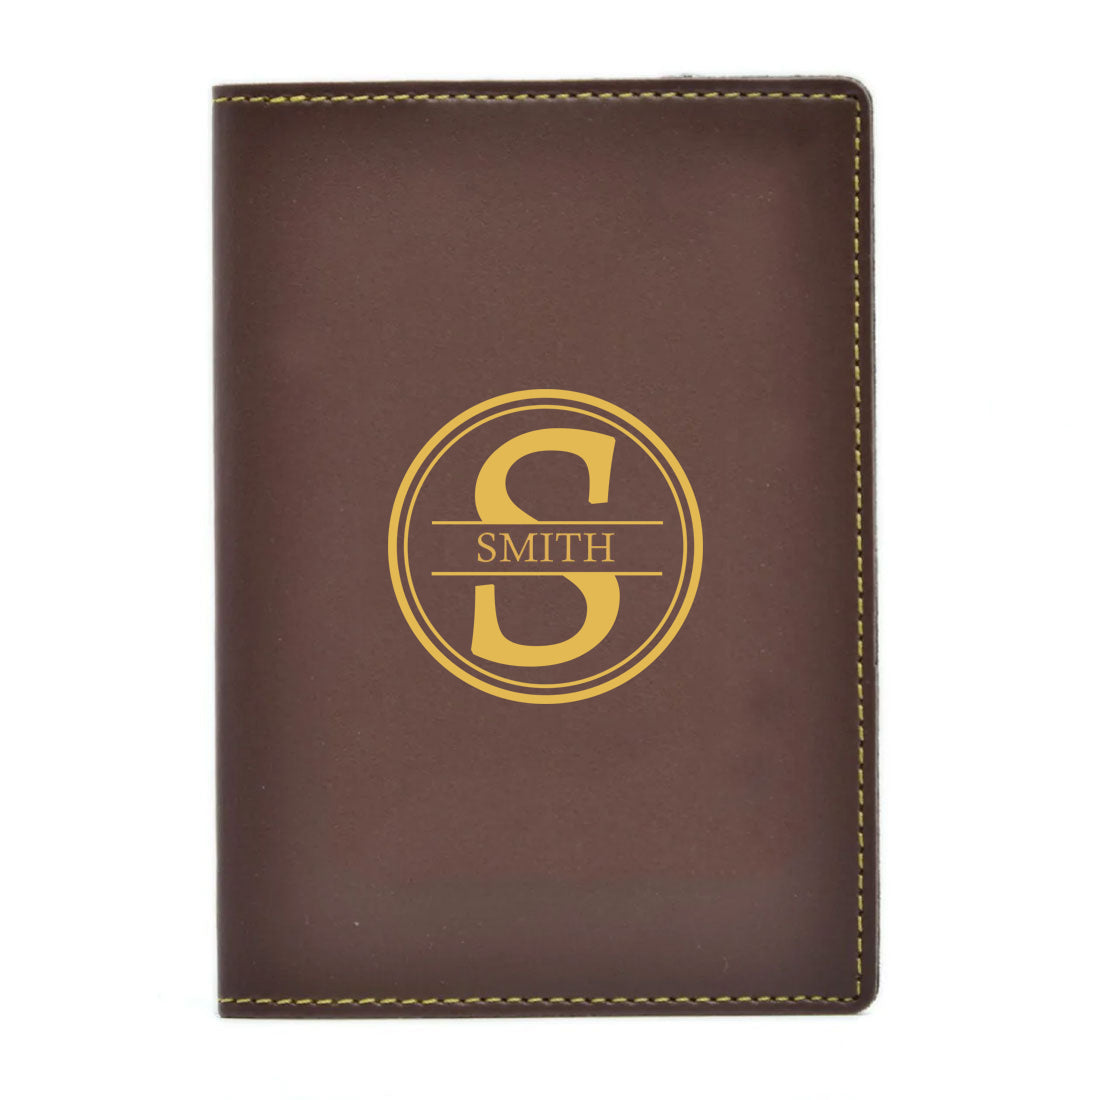 Customized Passport Cover PU Leather Case Add Name - Monogram